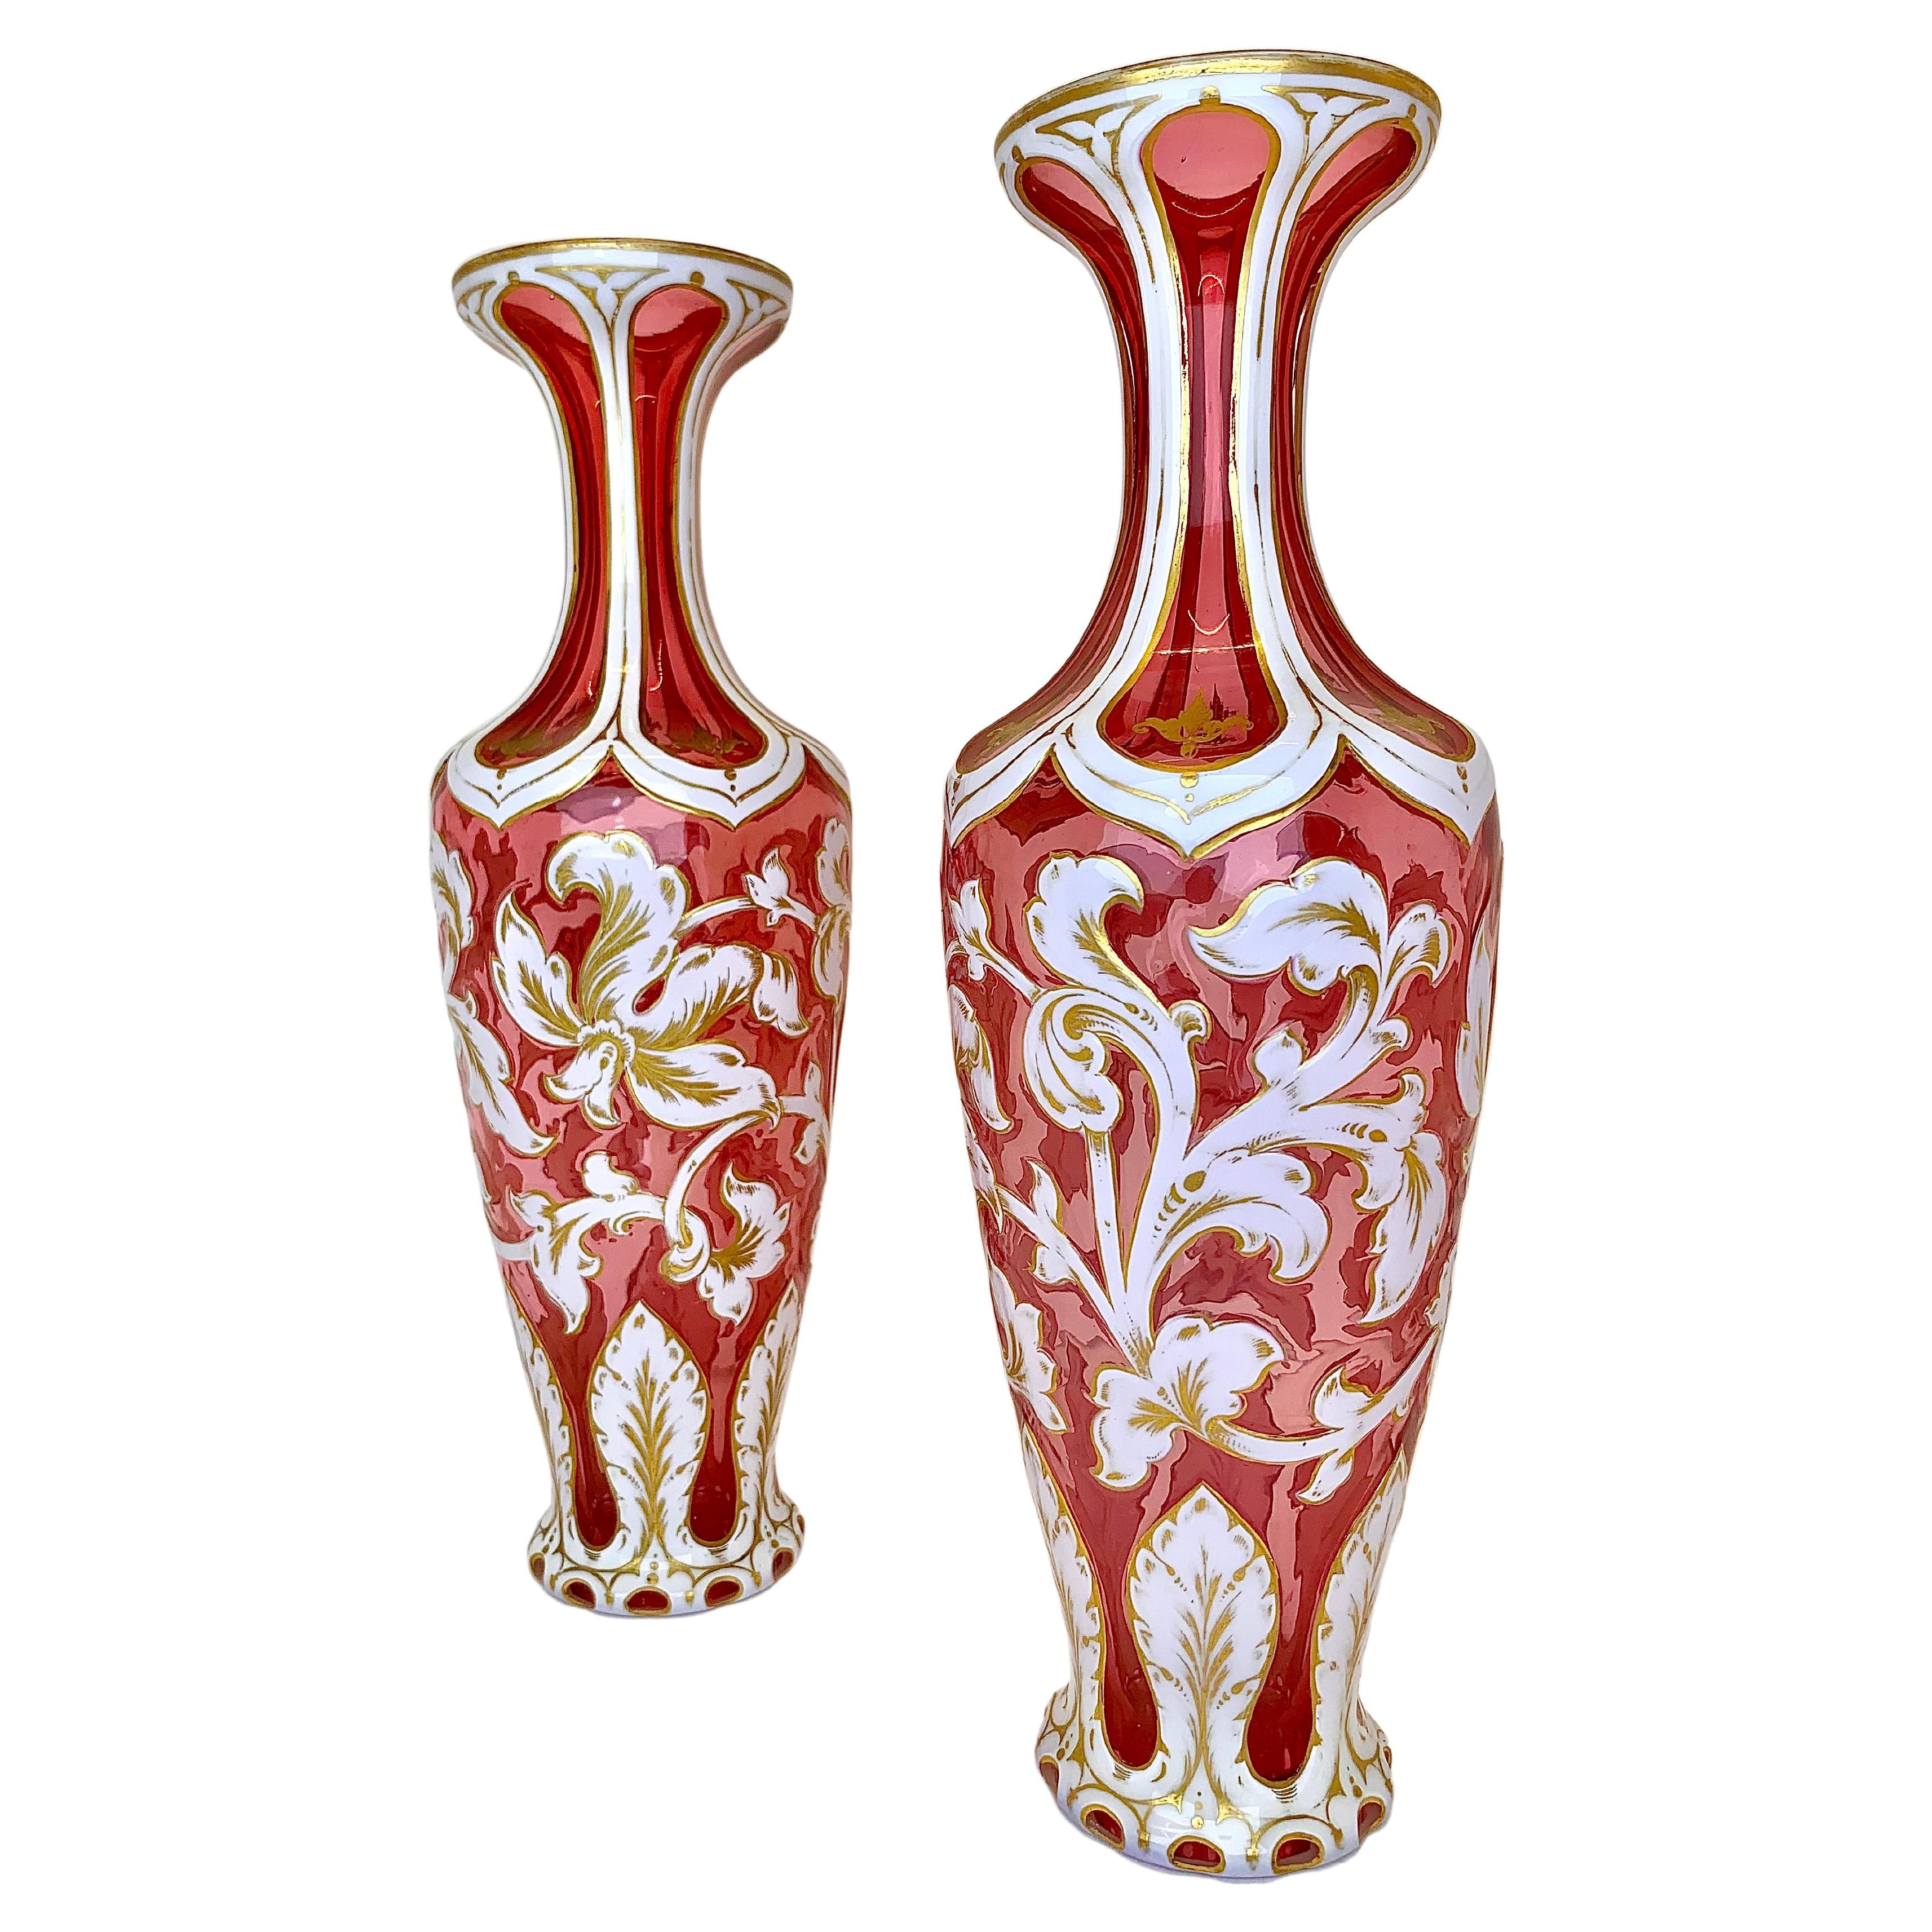 A Fine Pair of Antique Bohemian Vases in Cranberry Glass and Milky White Opaline Overlay

Both Layers of Glass are Deorated with Hand-painted Gilding Highlights

Fine Example of the Highest Quality 19th Century Bohemian Glass Artists